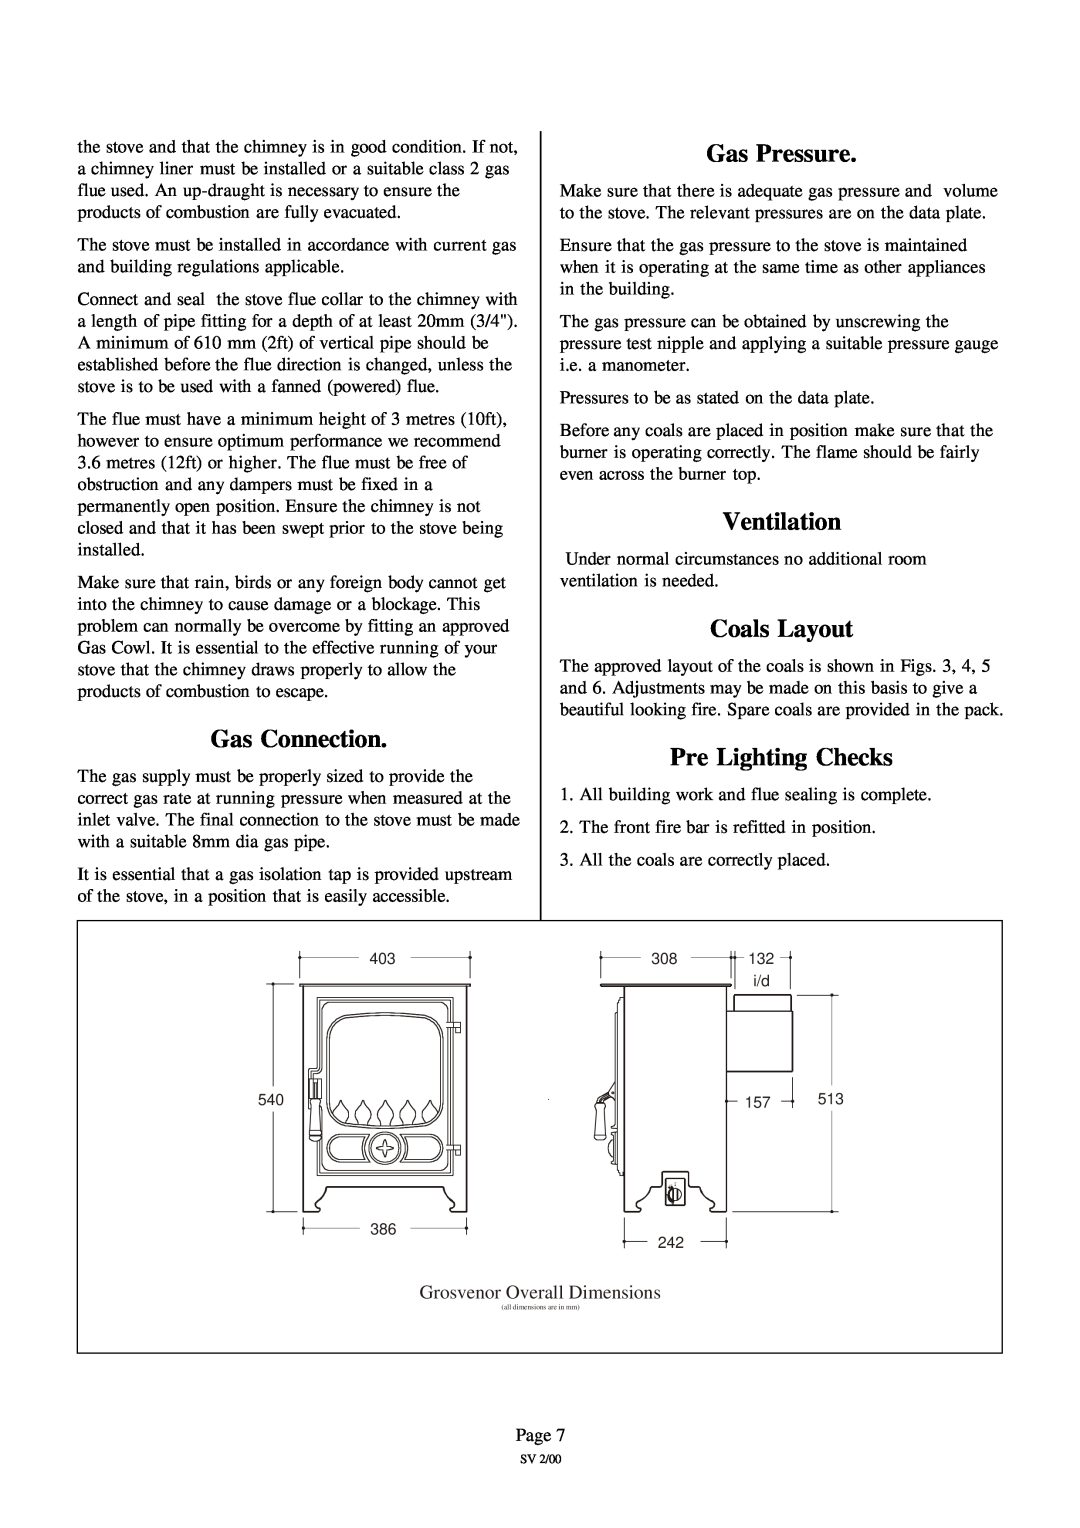 Charnwood Grosvenor installation instructions Gas Connection, Gas Pressure, Ventilation, Coals Layout, Pre Lighting Checks 